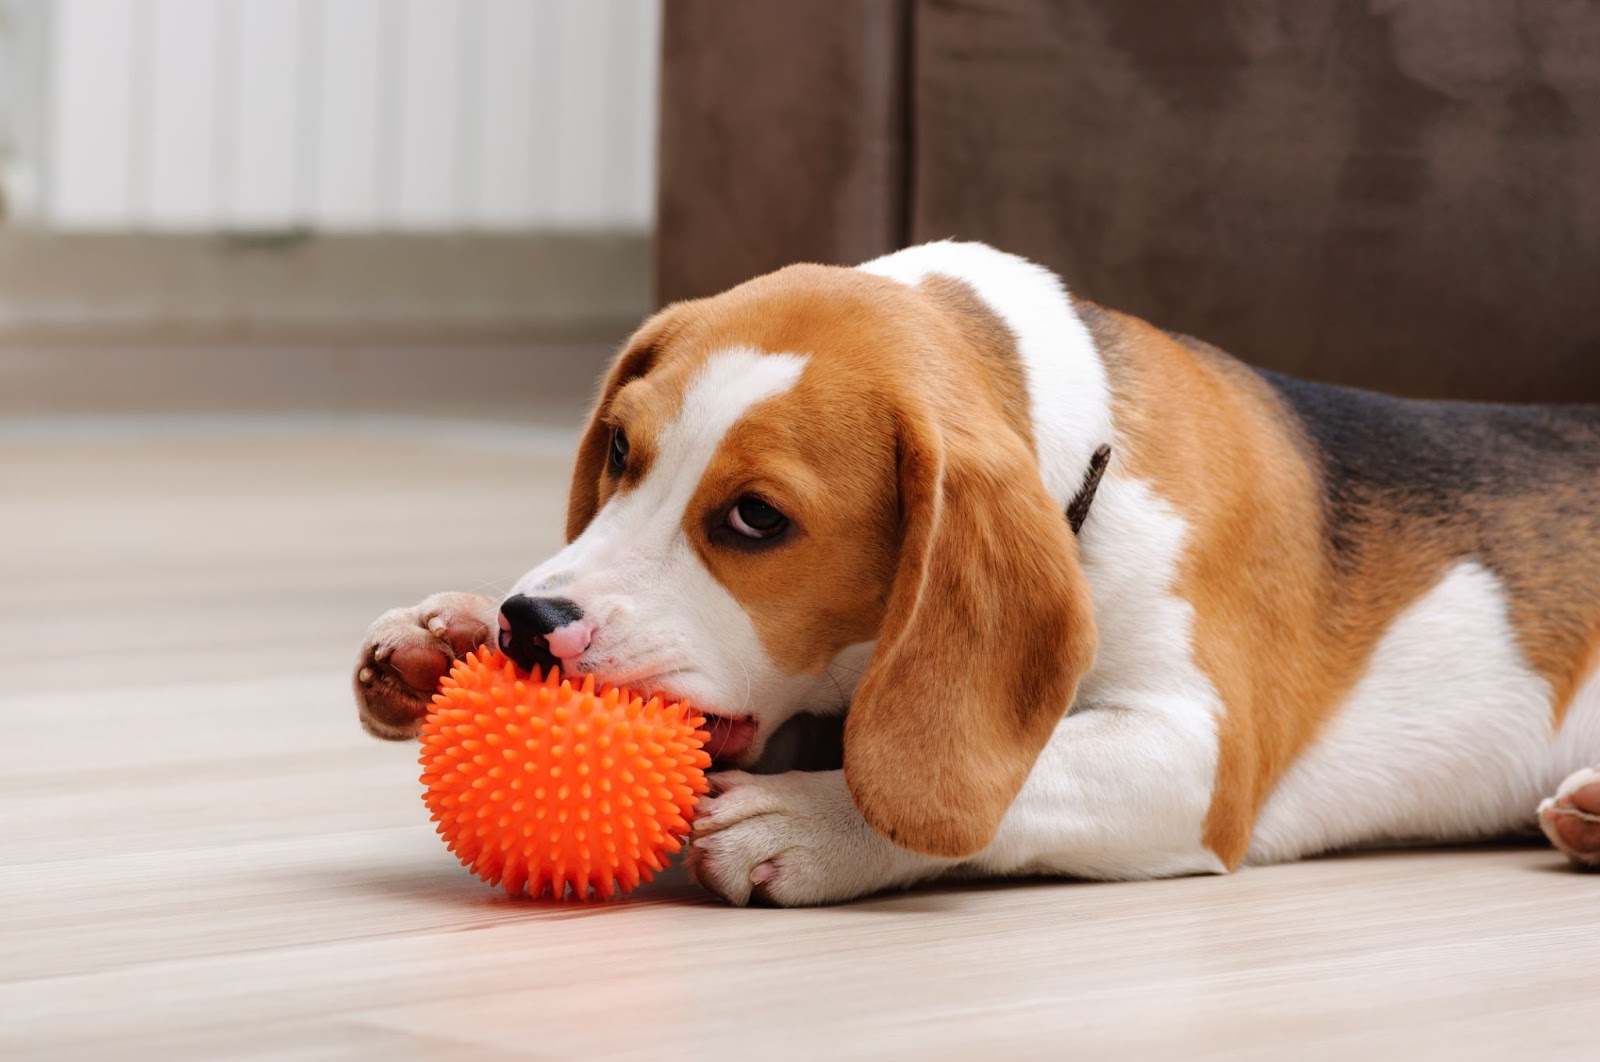 A young puppy chews on a teething ball